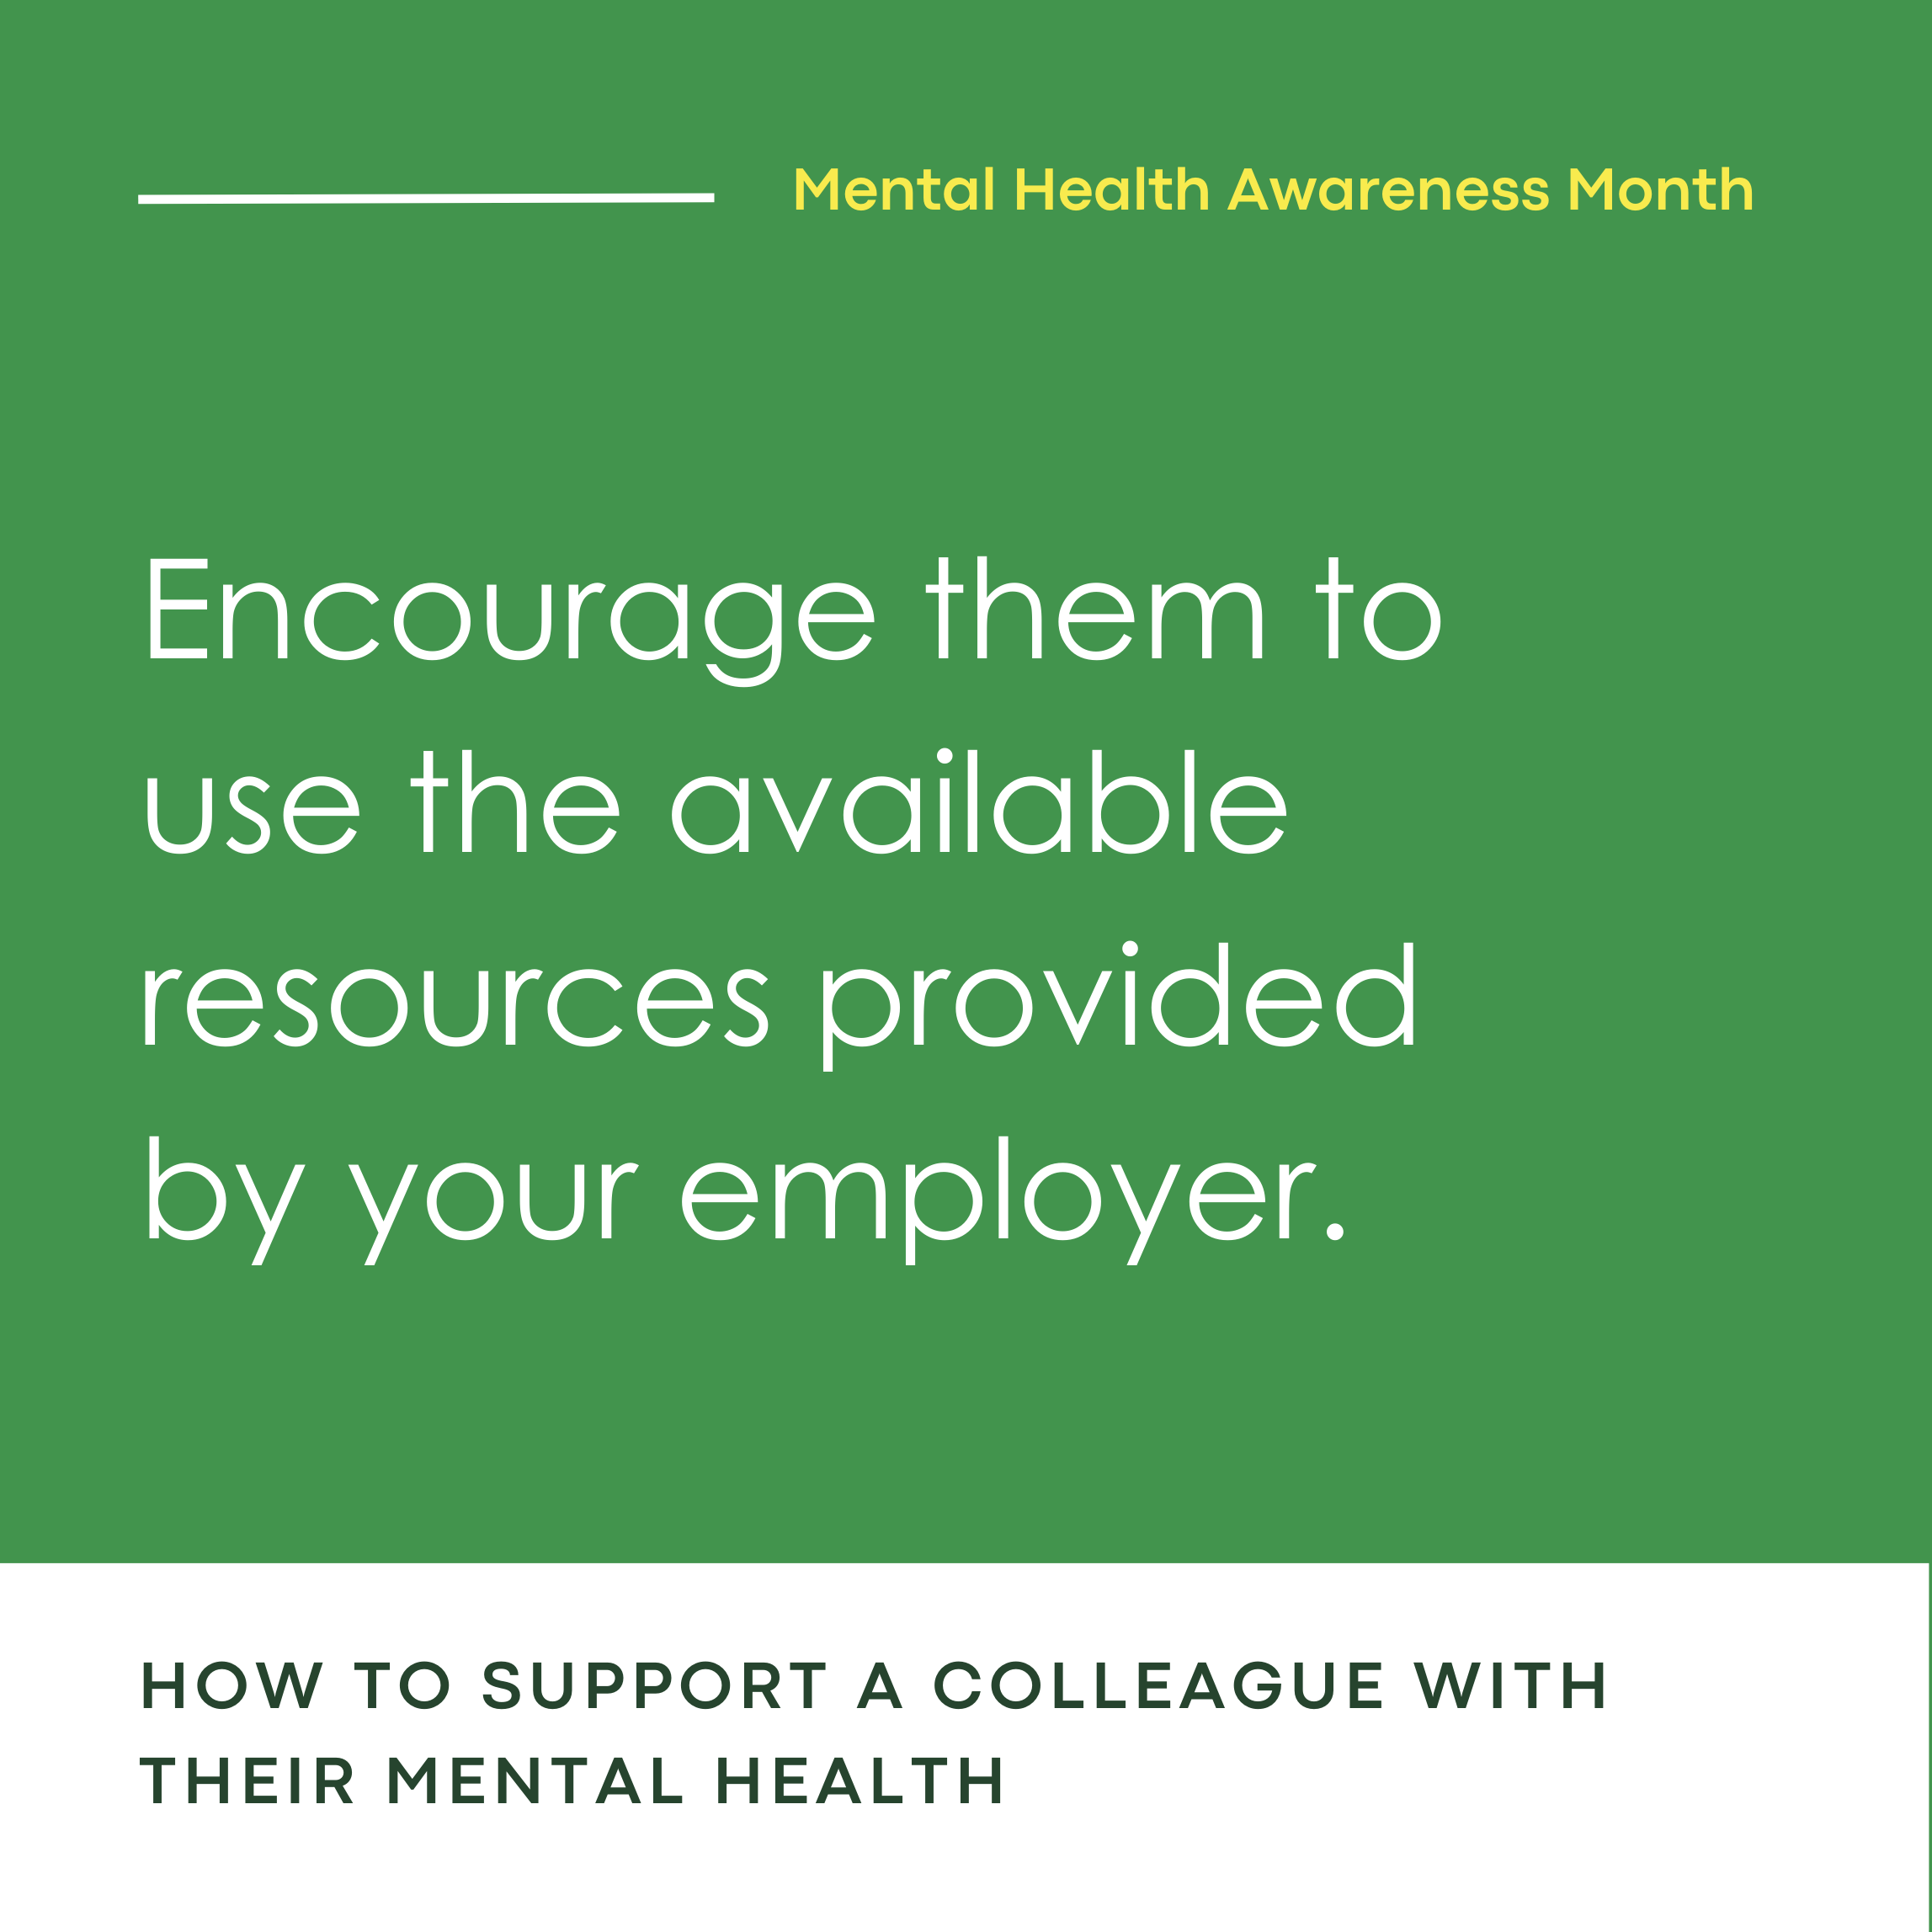 Encourage them to use the available resources provided by your employer